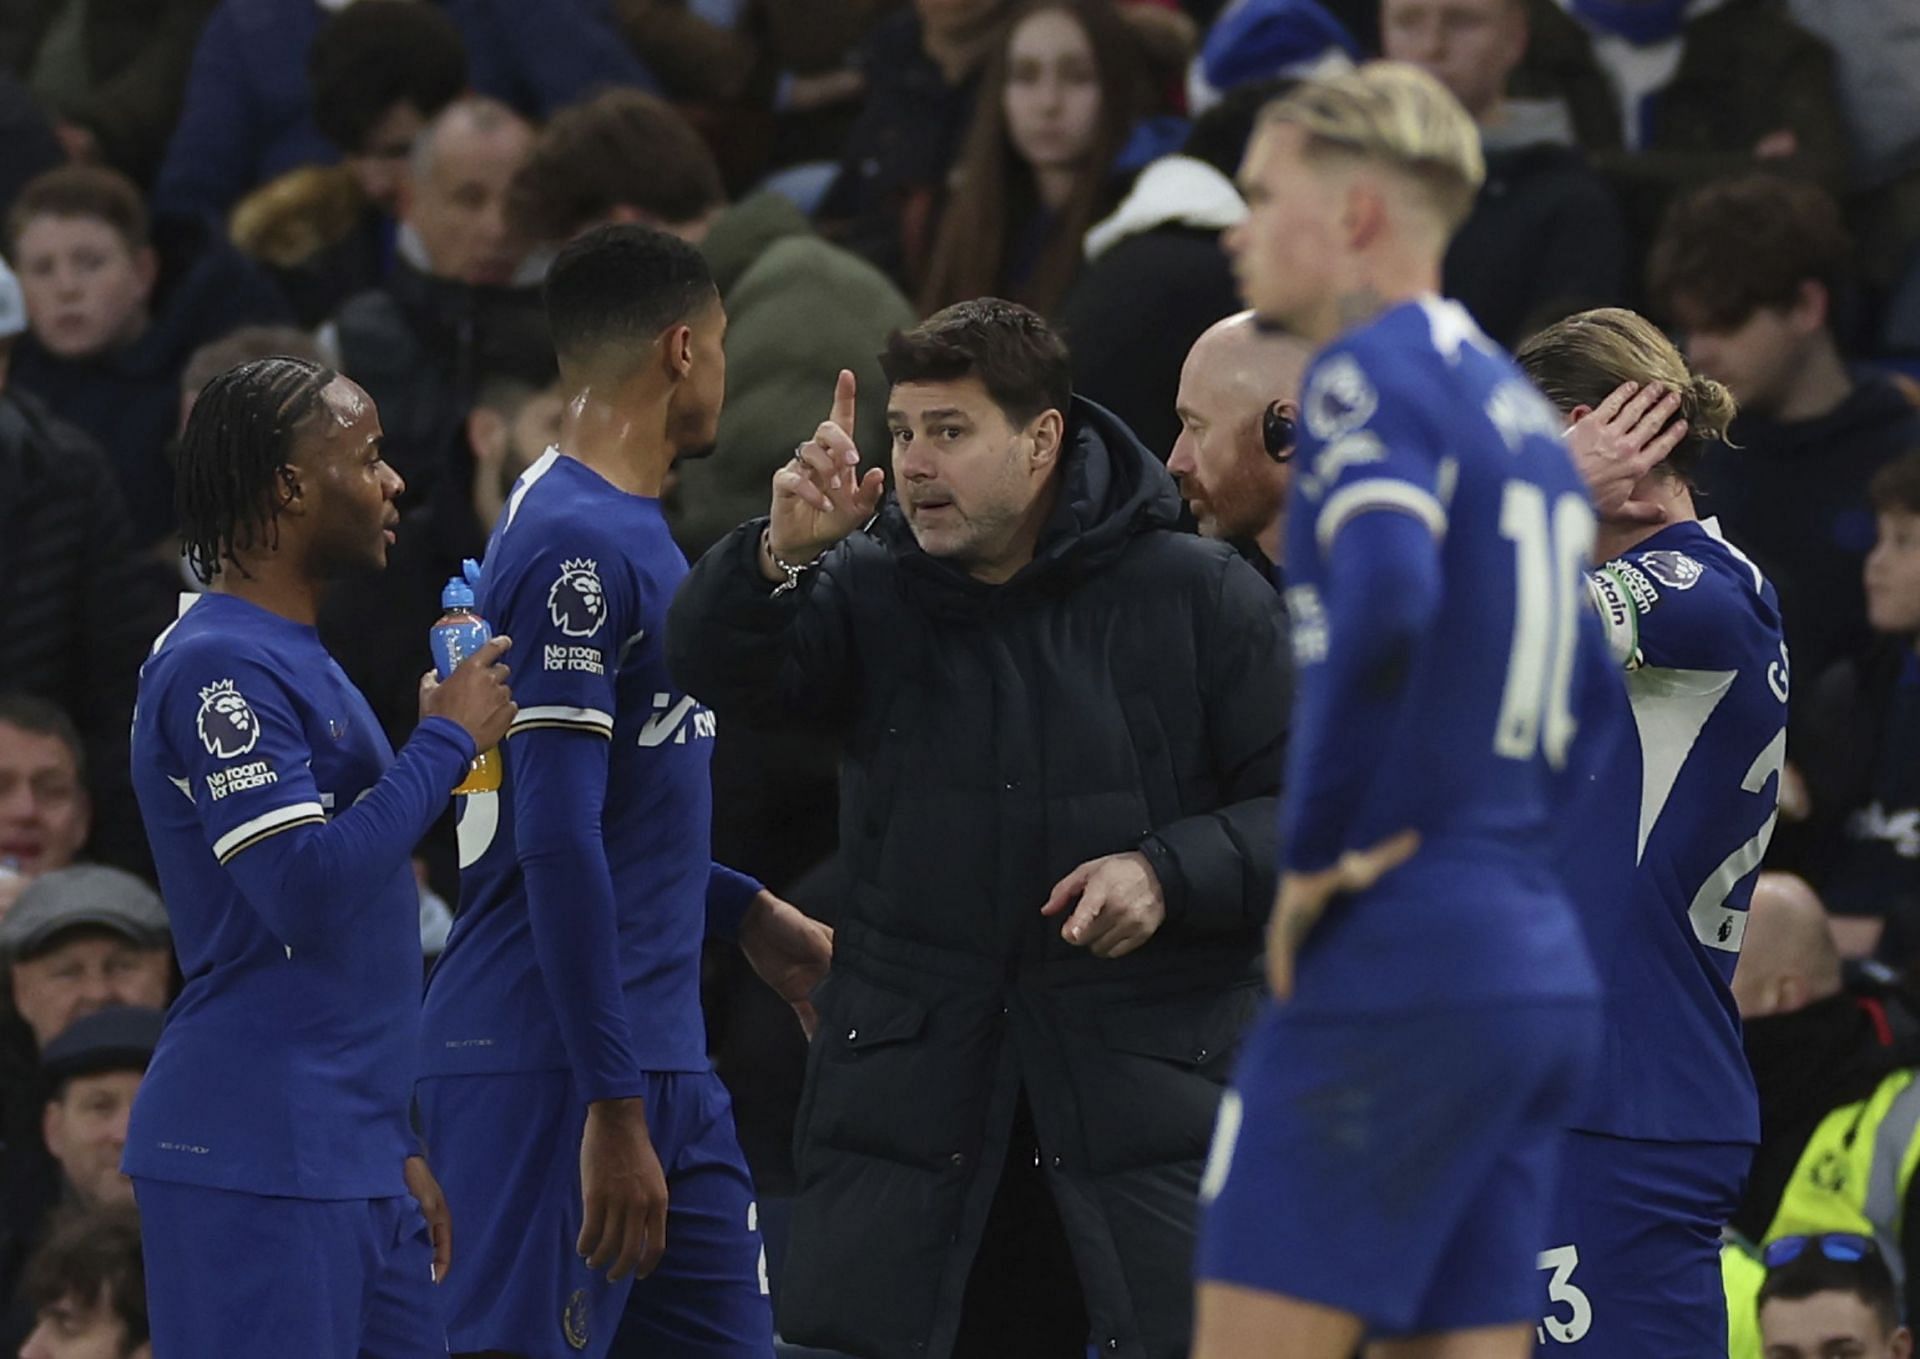 Chelsea manager Mauricio Pochettino will be keen to get all 3 points